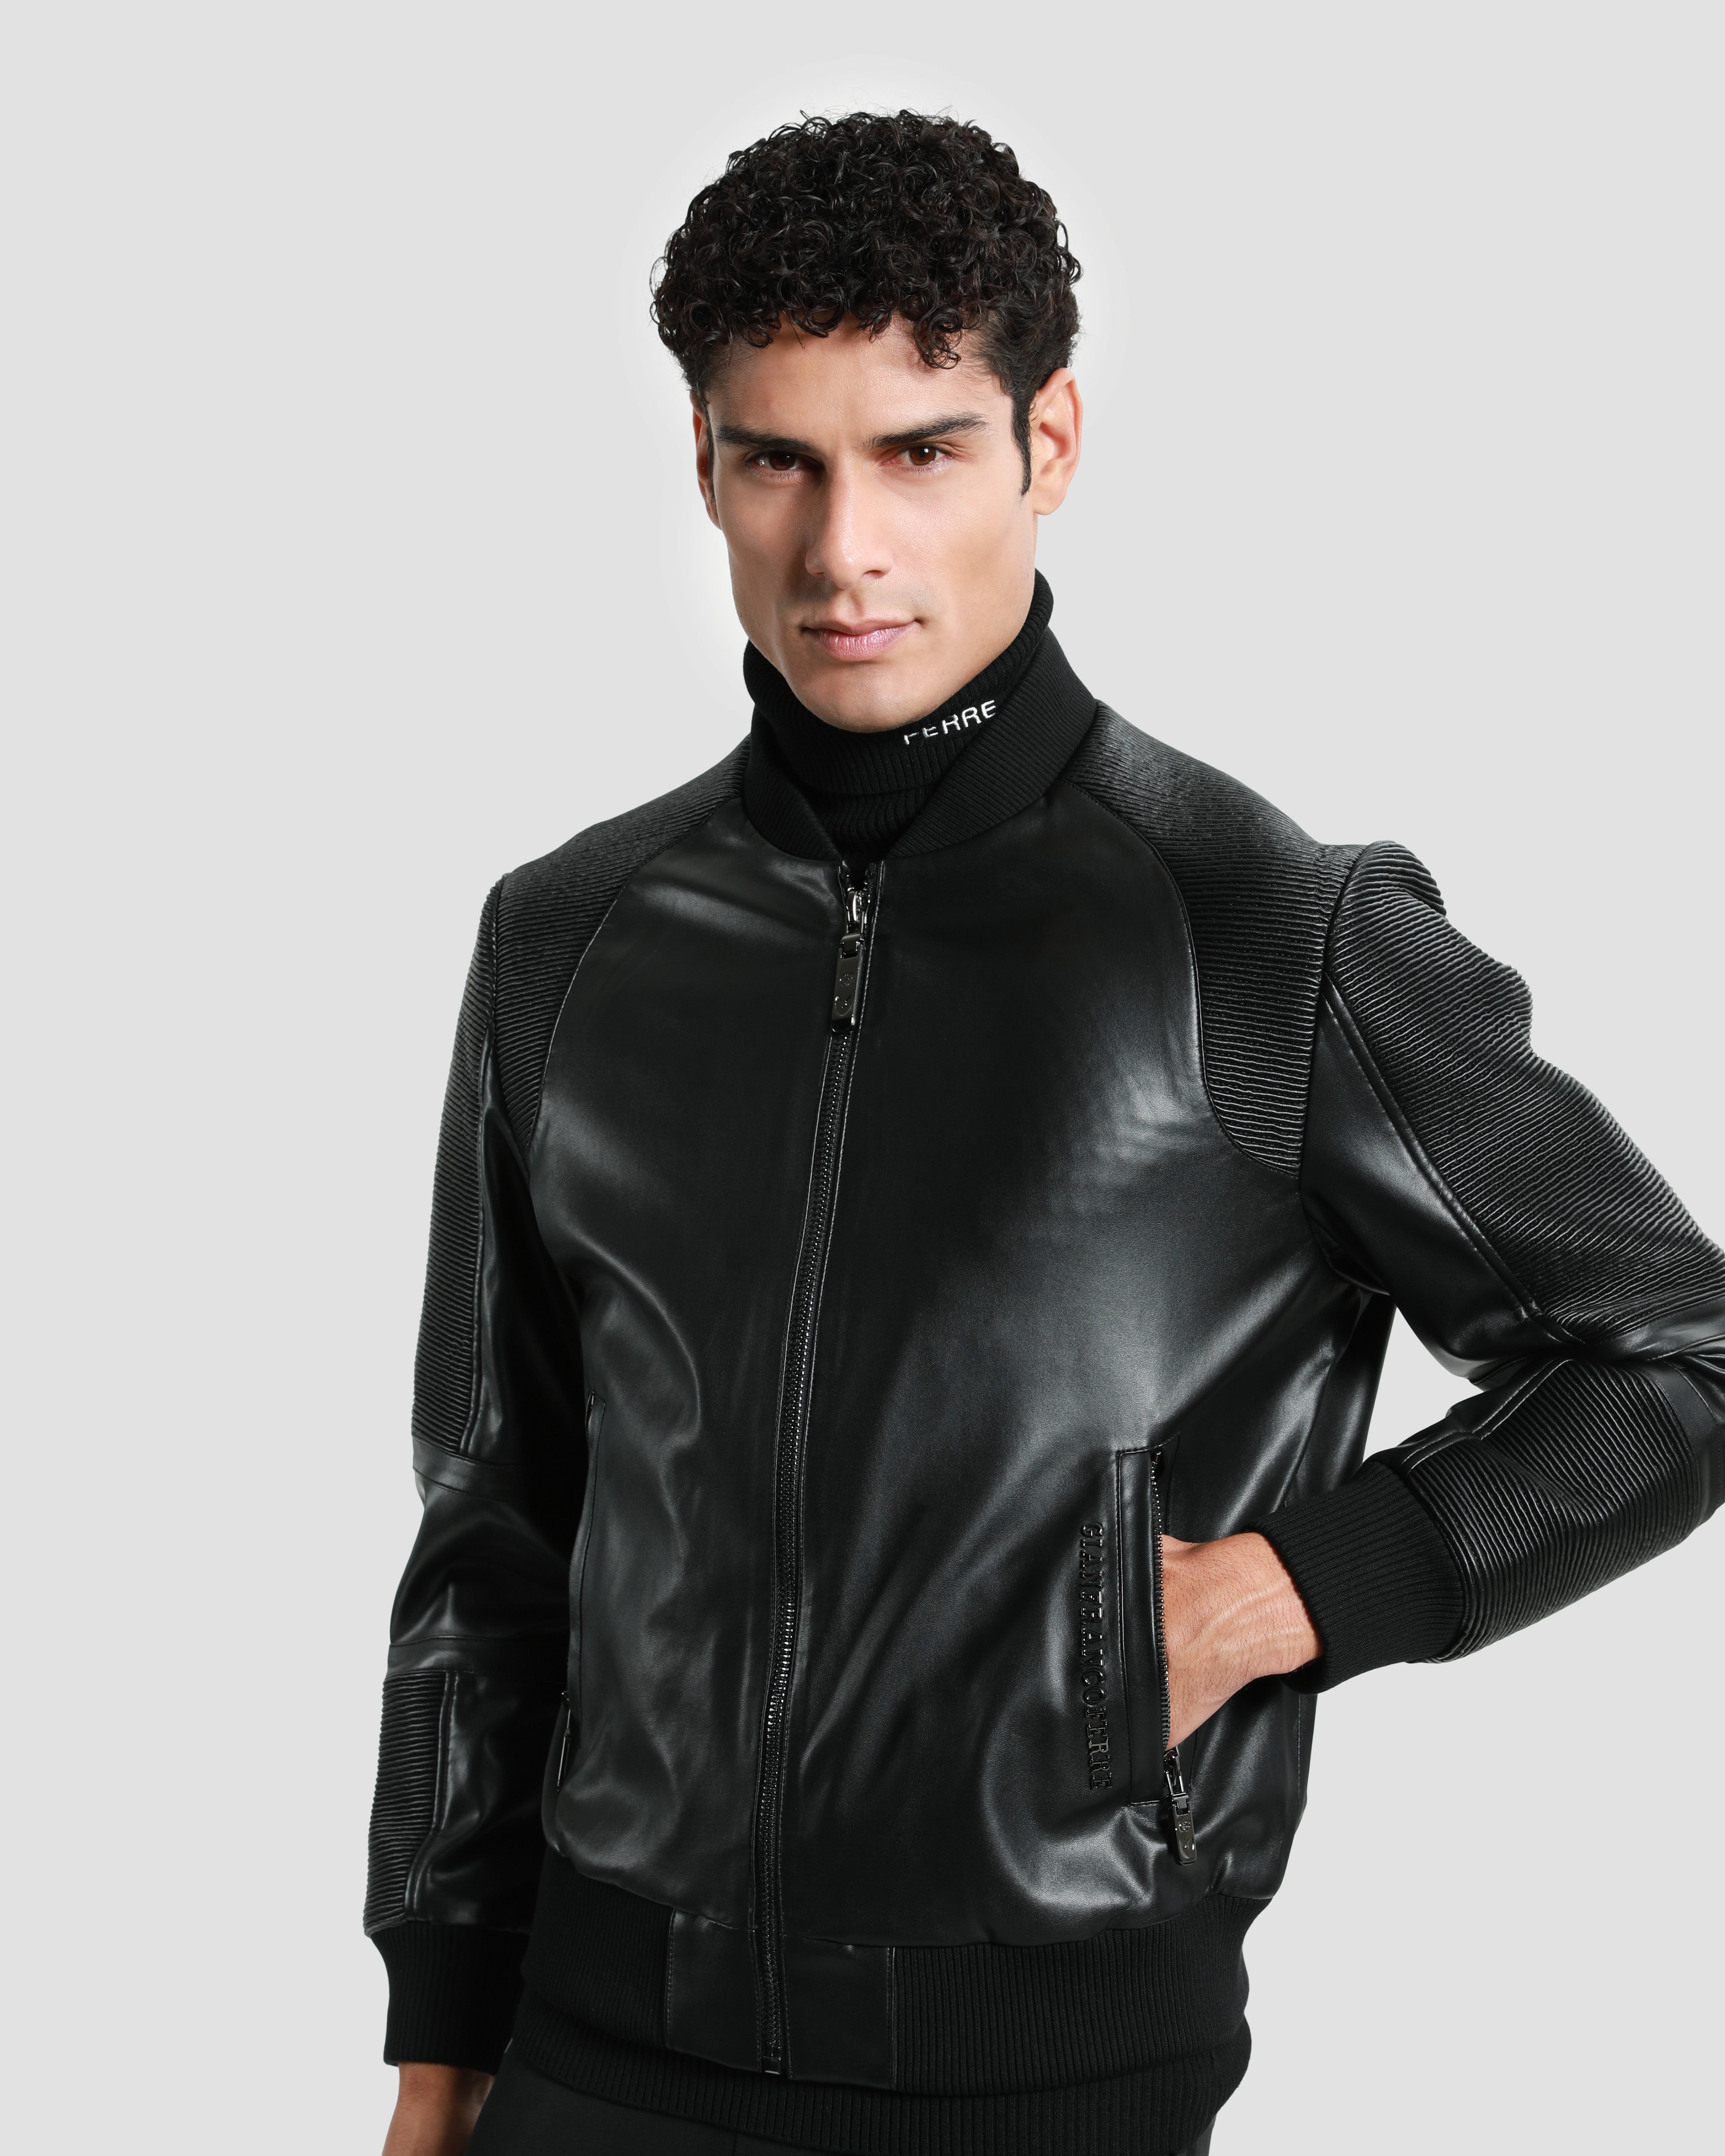 Buy JUSTANNED Ribbed Leather Jacket Black at